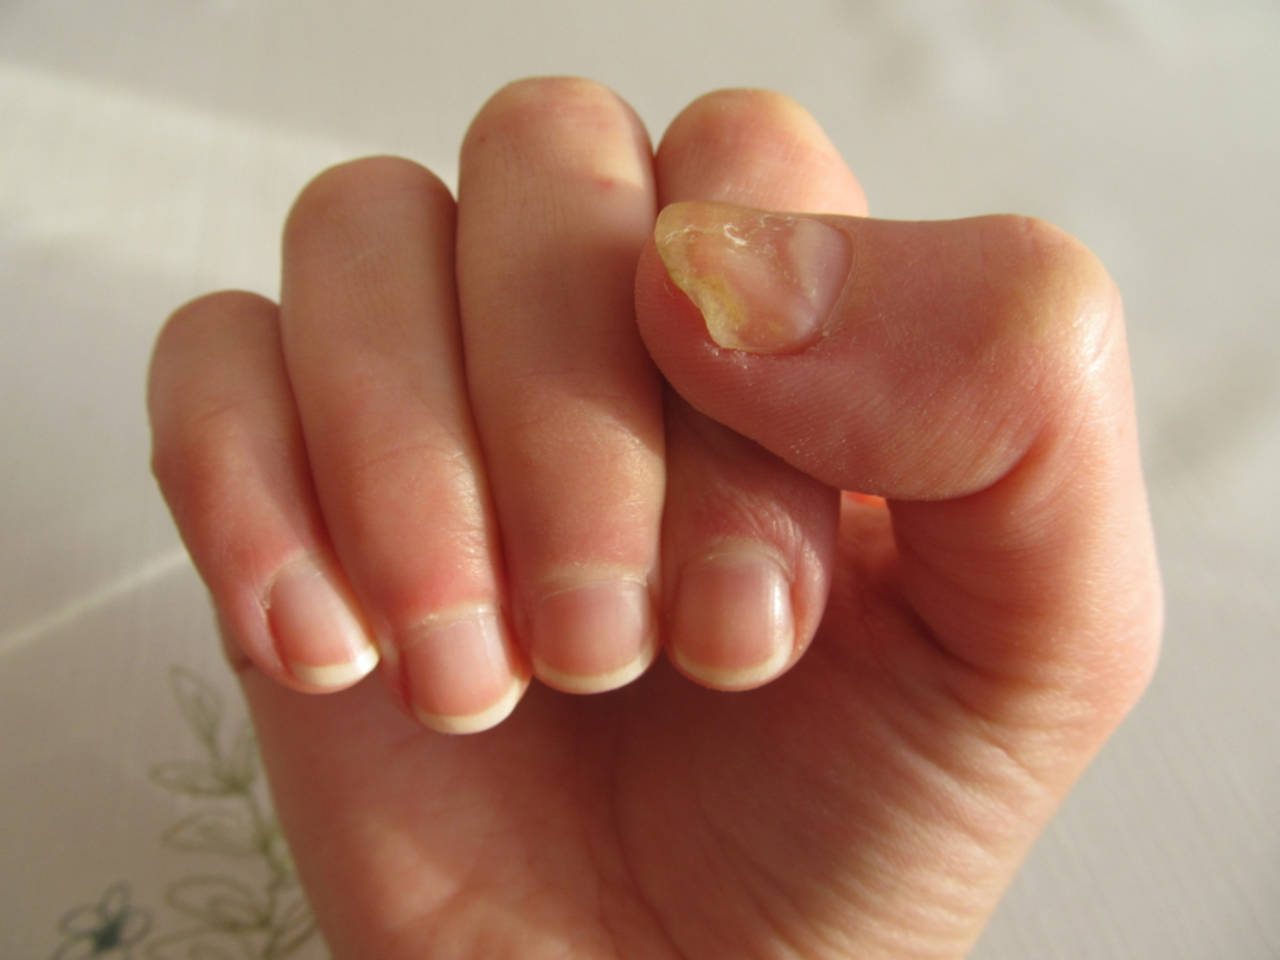 Yellow Nails: What causes yellow nails and how to cure this problem | -  Times of India